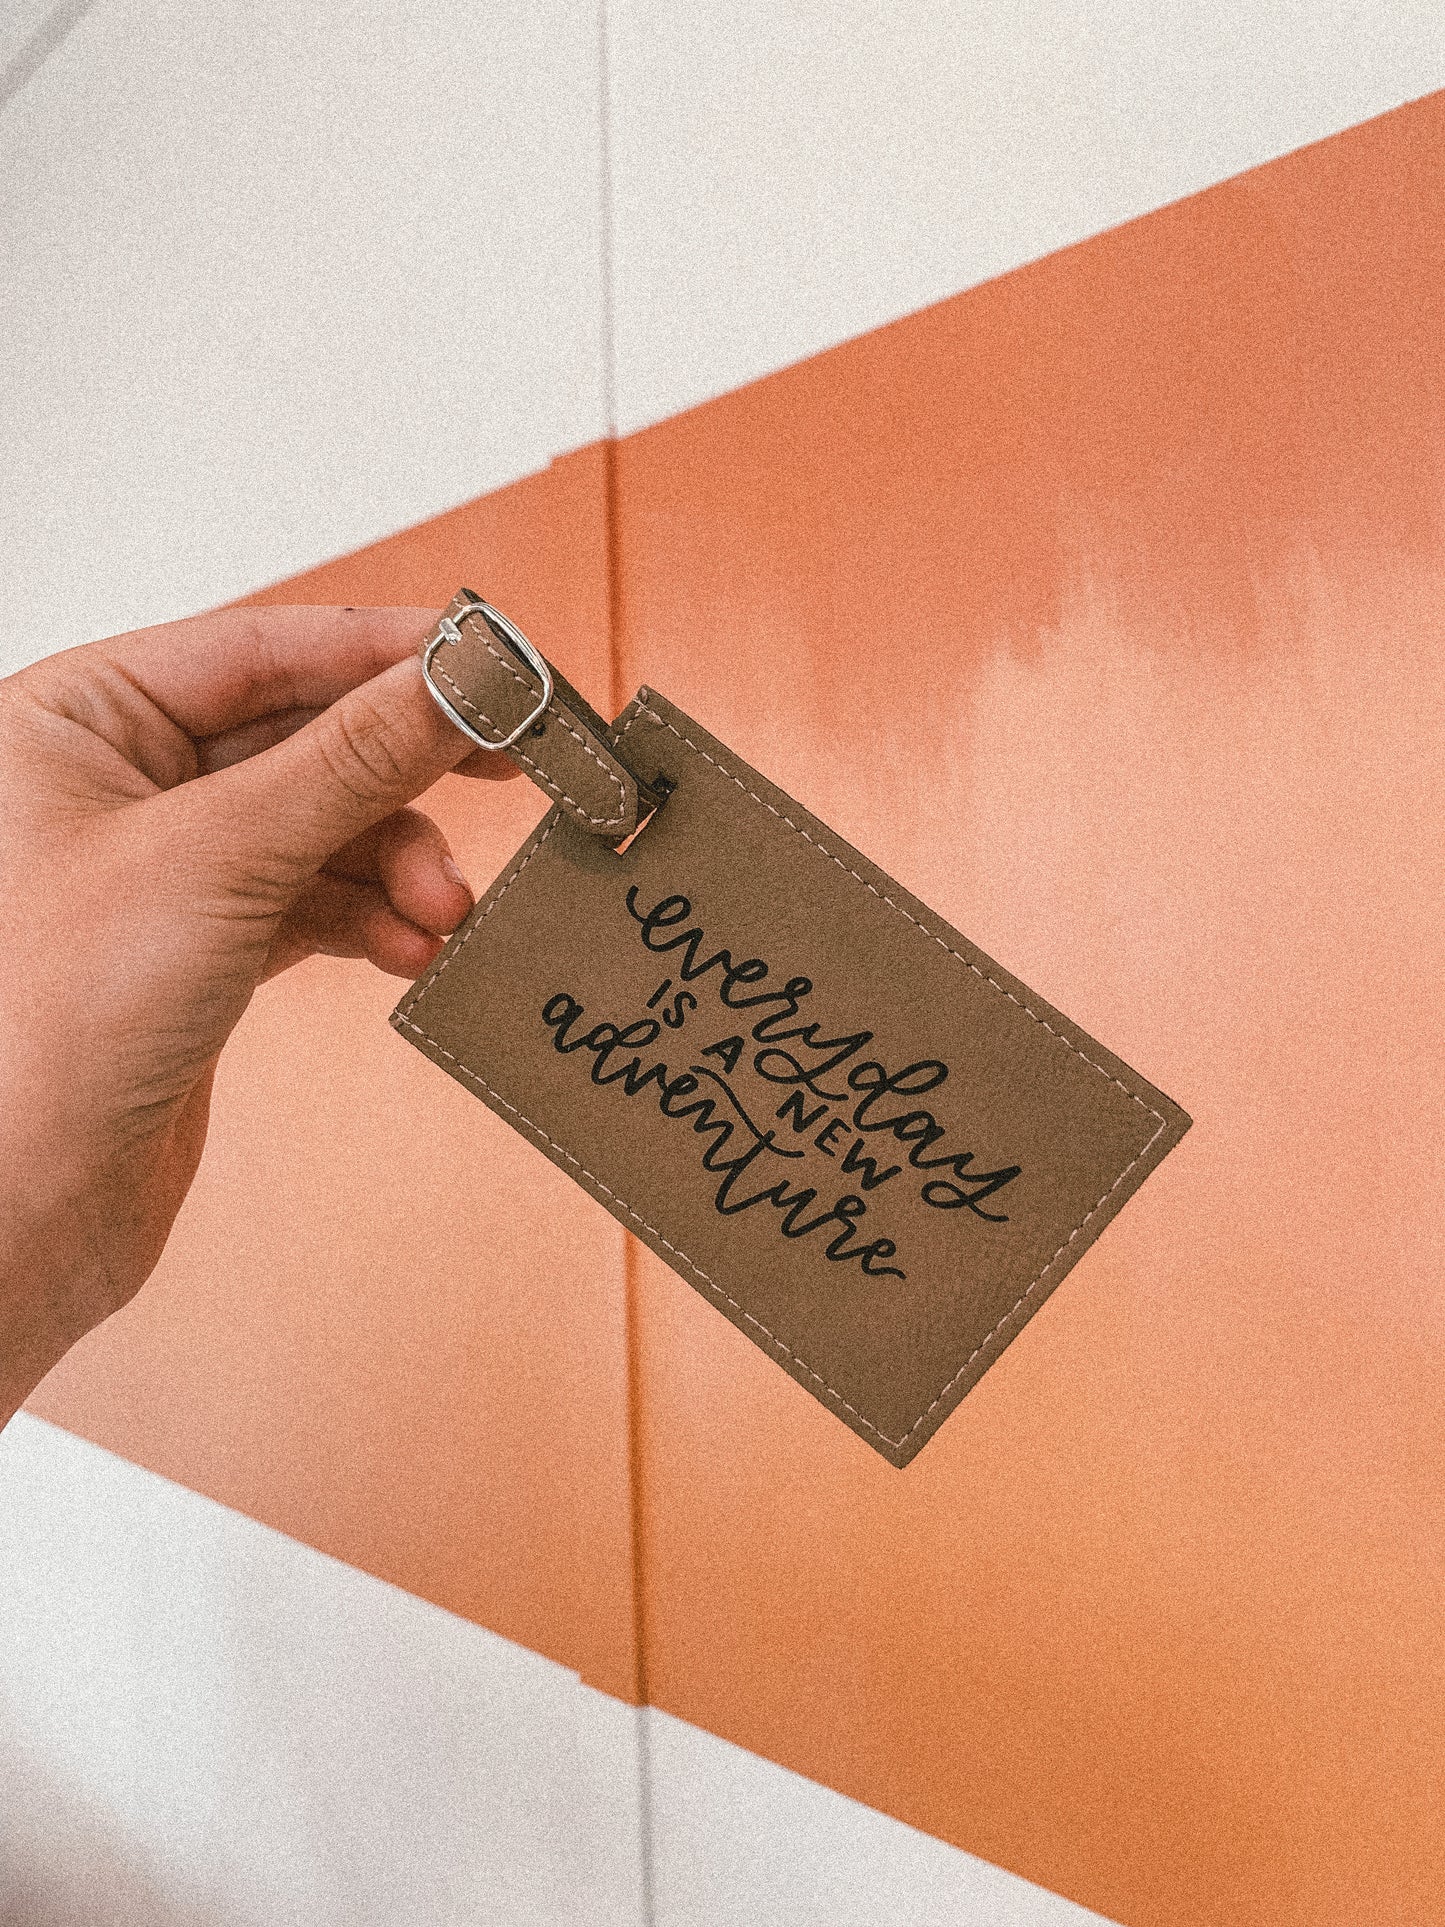 'Everyday is a new adventure' leather luggage tag